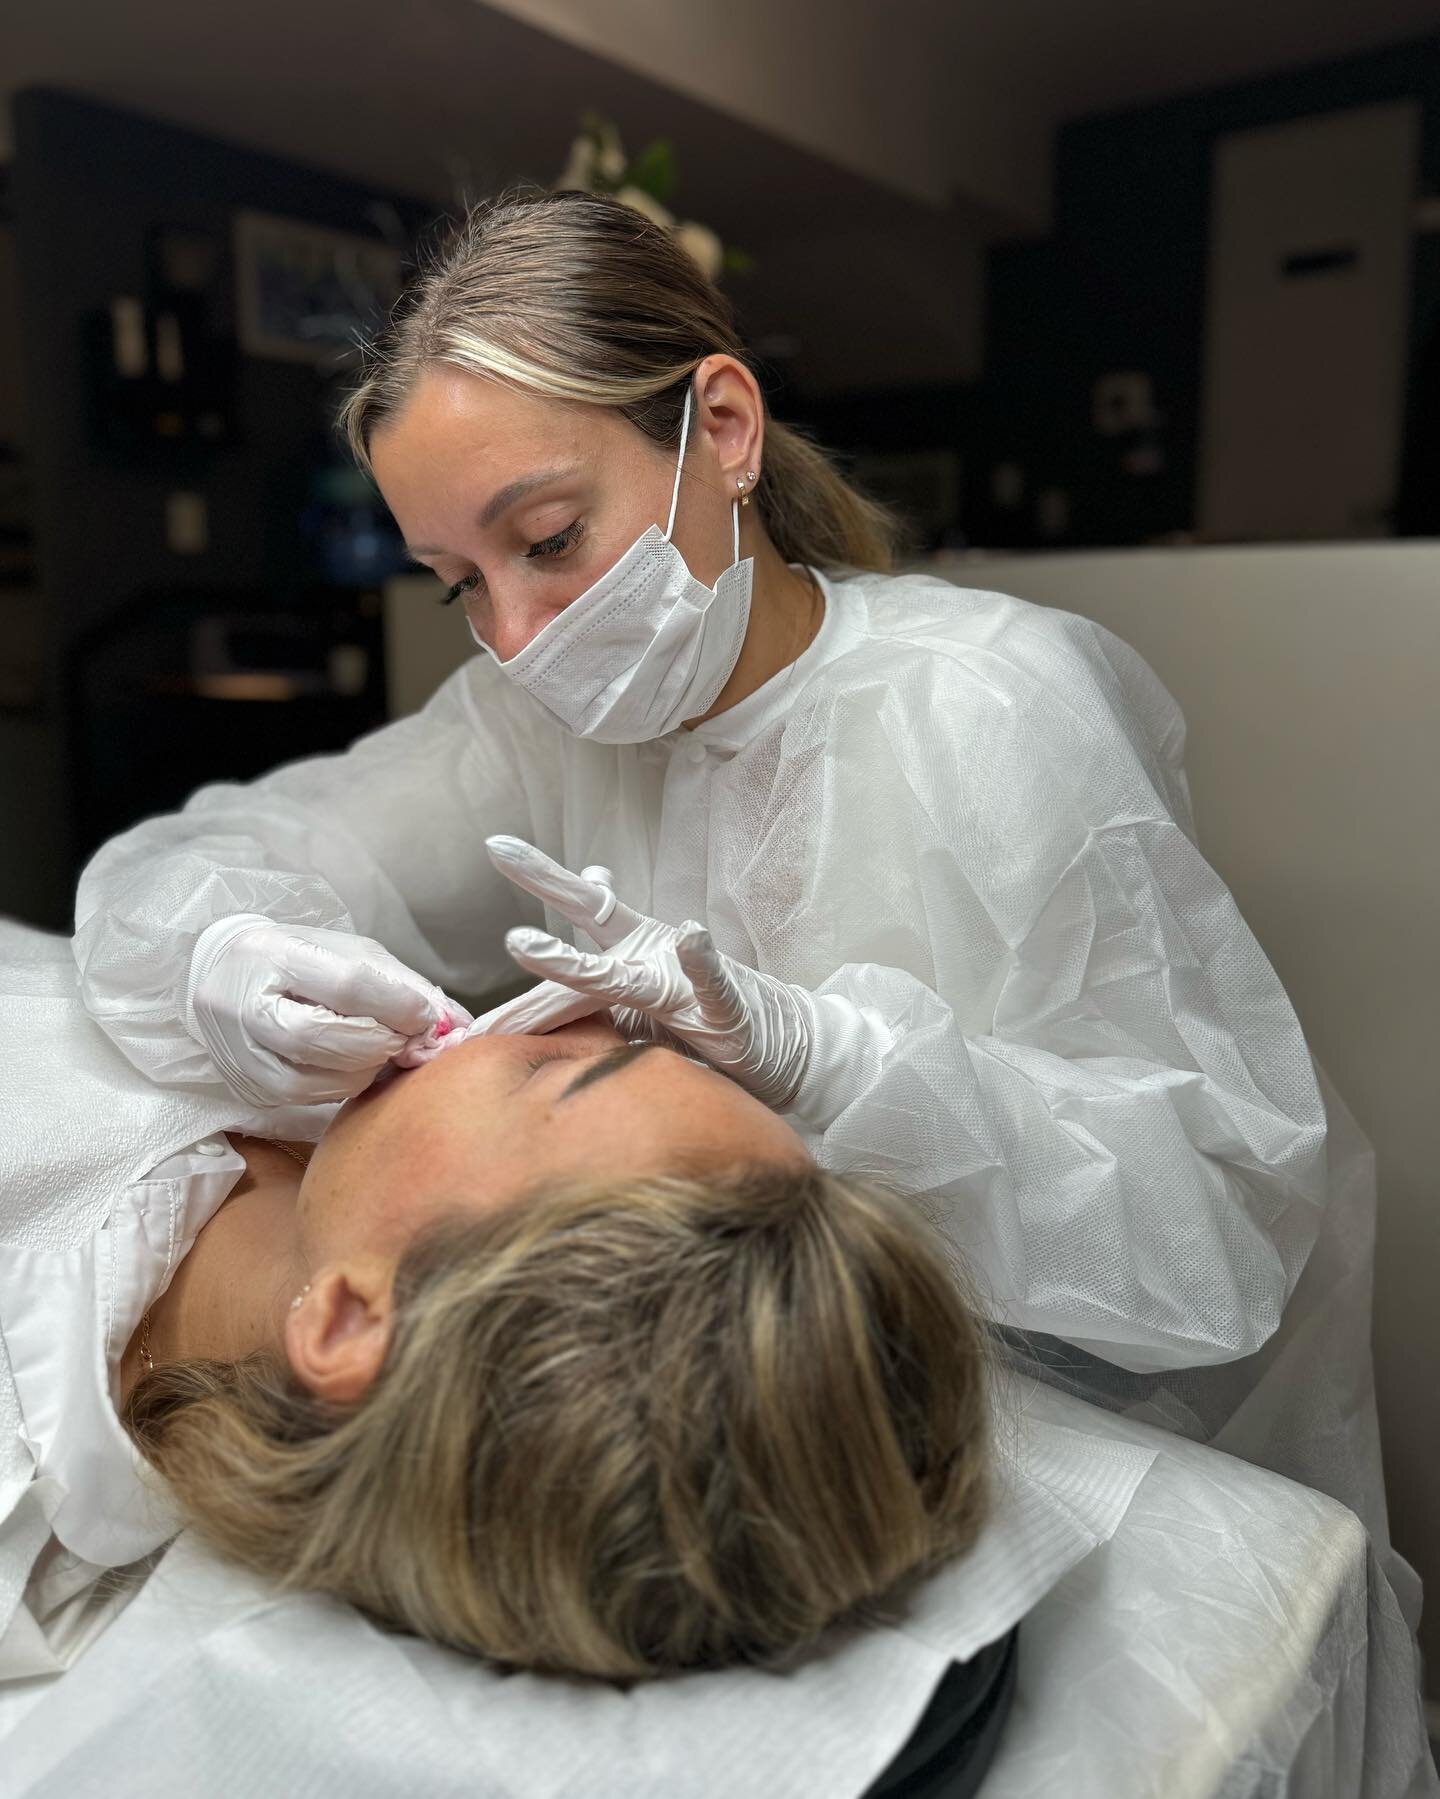 HOW LONG DOES PERMANENT MAKEUP LAST?
Permanent makeup can last 1-3 years, but the duration varies depending on several factors. Here are some key points to consider: skin type, exposure to the sun, skincare routine and lifestyle.🙌

#pmuartist #pmuar